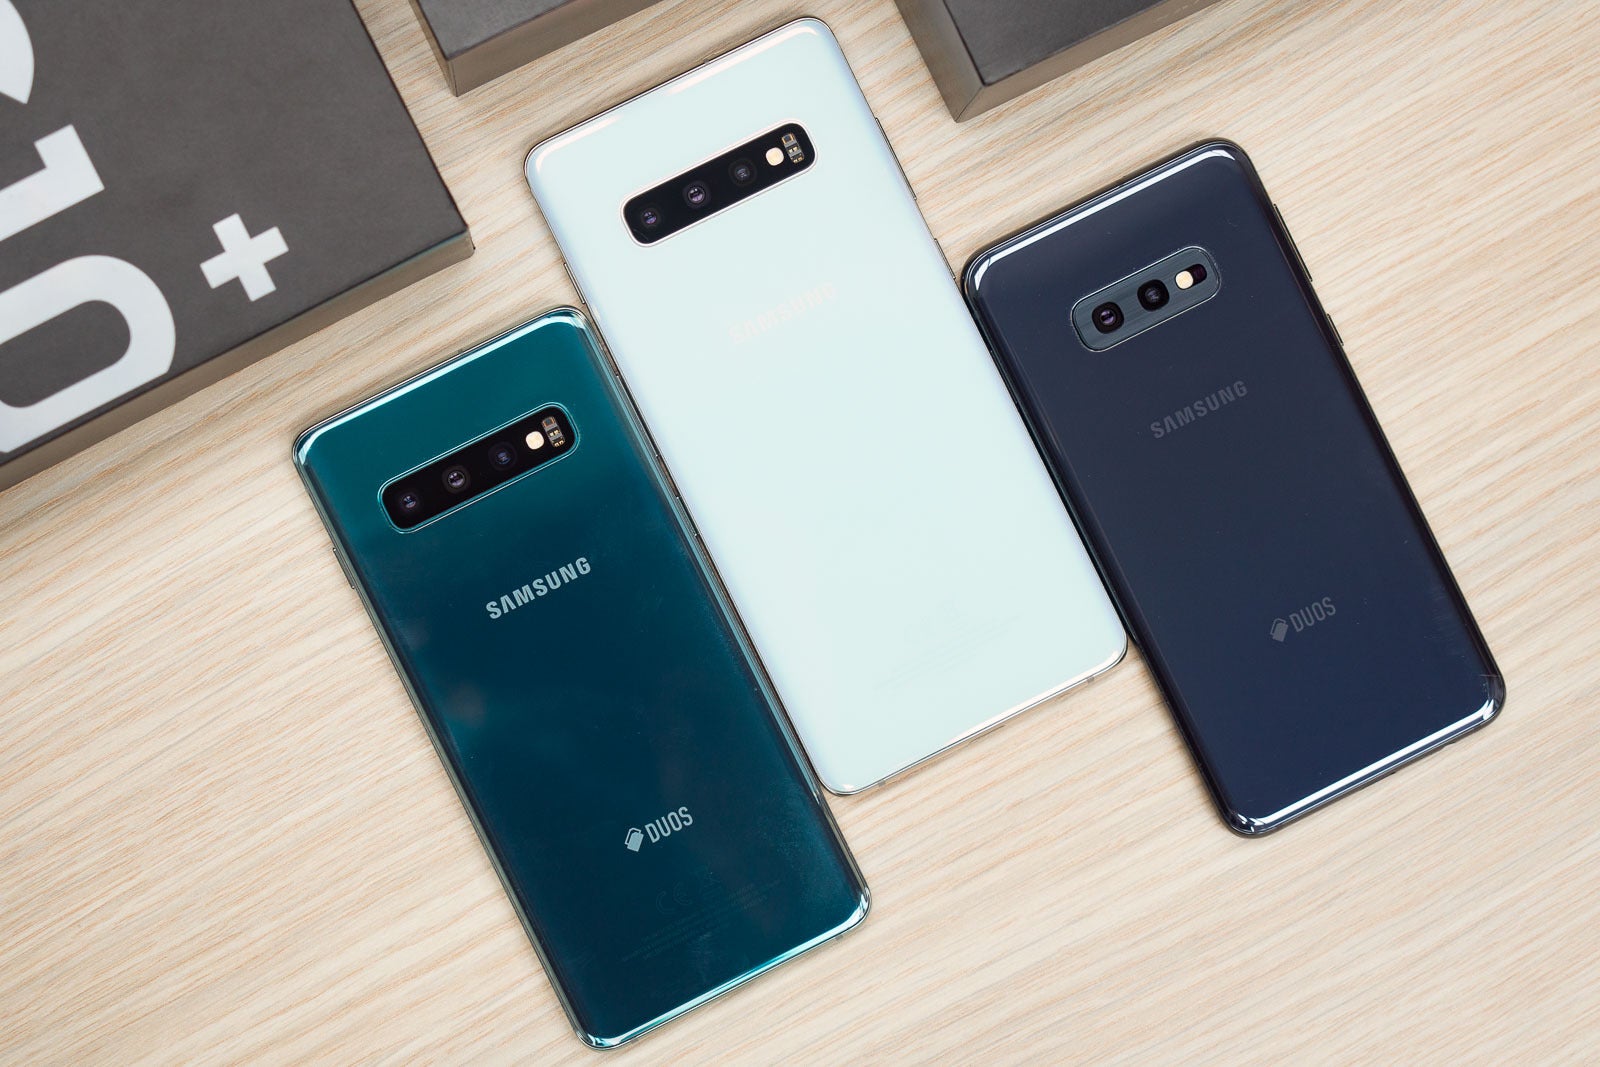 The Galaxy S10 family - What happened in mobile tech in 2019: a month-by-month recap